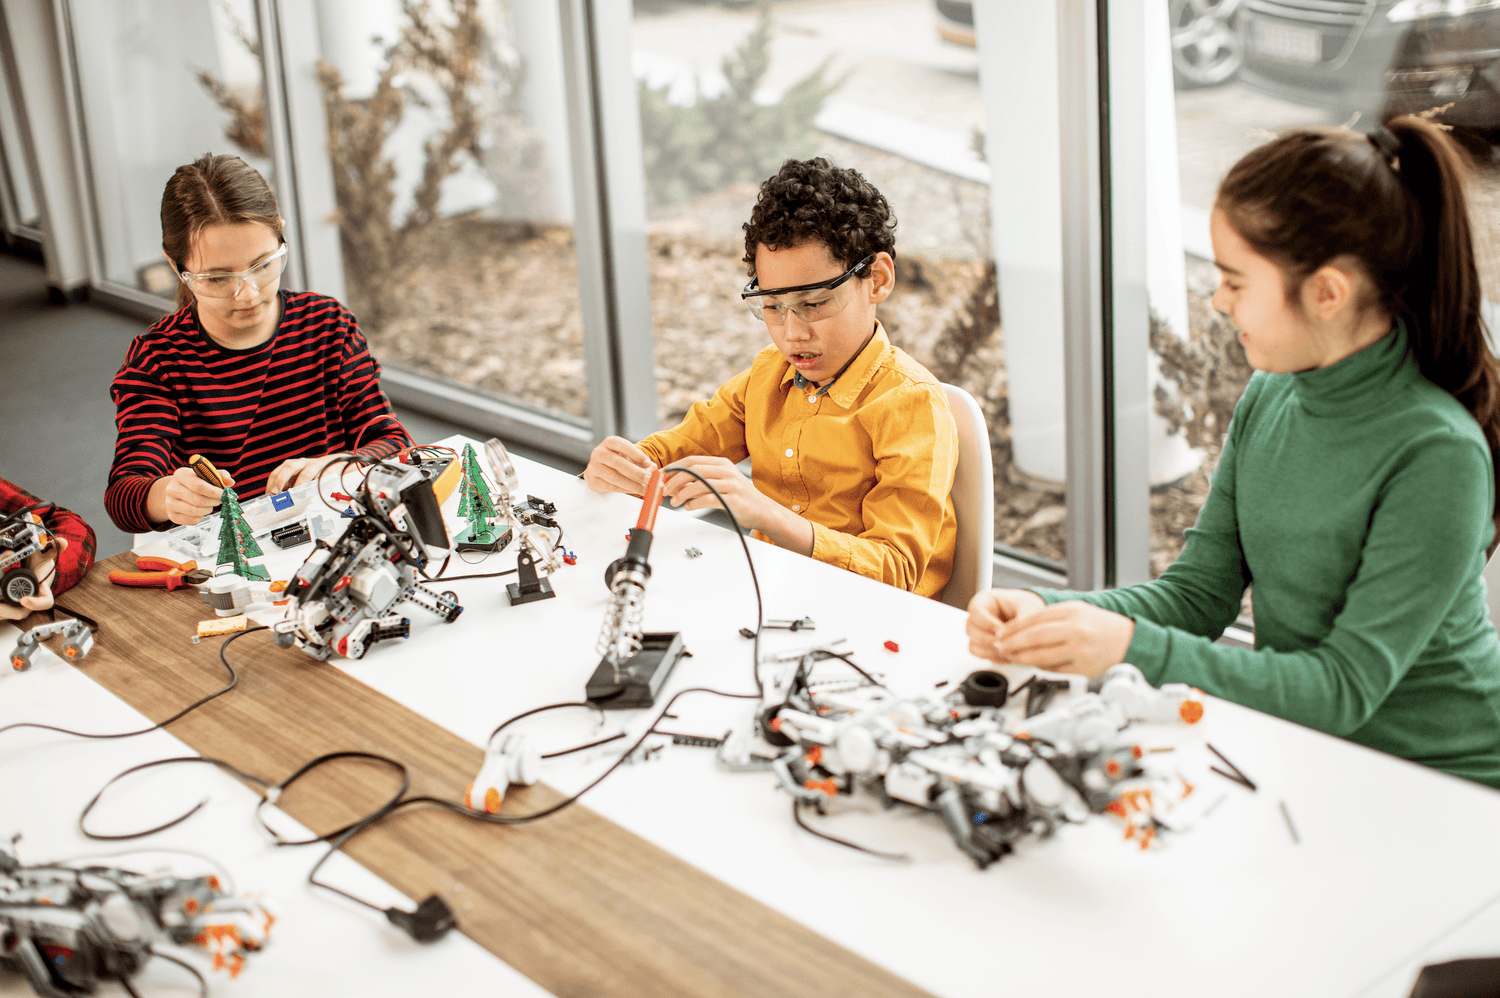 8 Ways to Get Your Kids Excited about Robotics